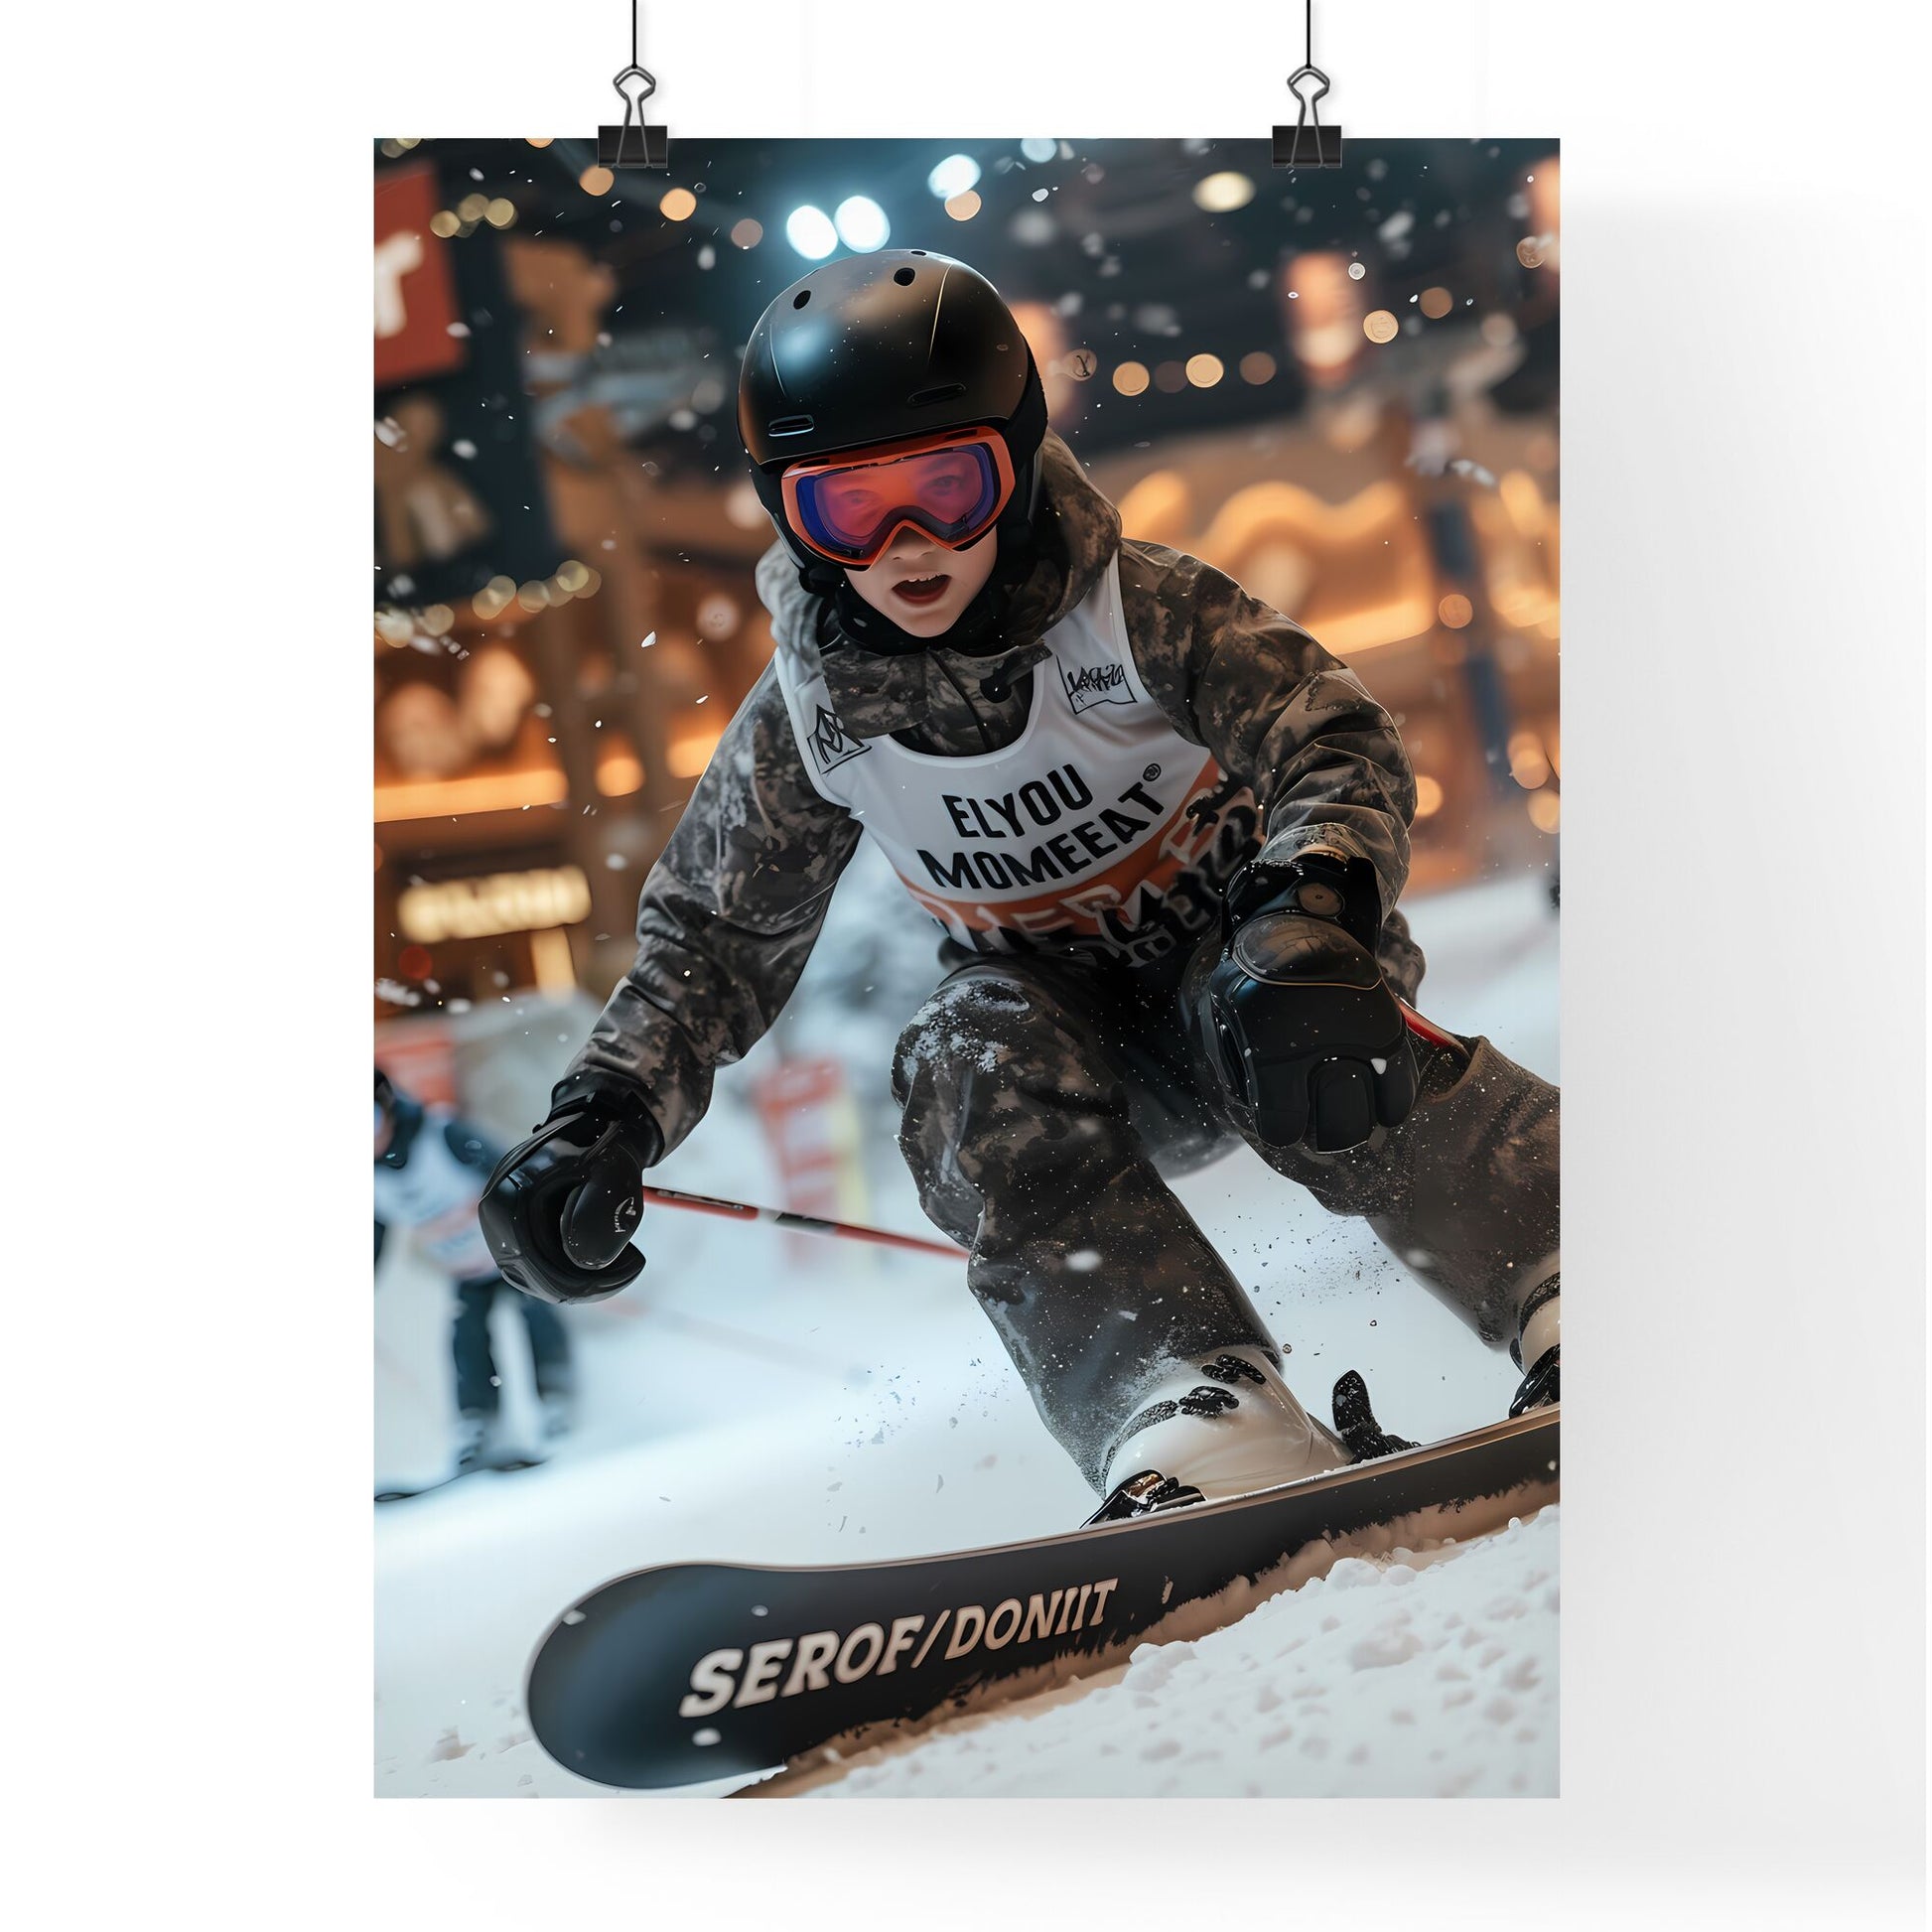 In the indoor ski resort, skiers gallop on the snow track - Art print of a person skiing down a slope Default Title